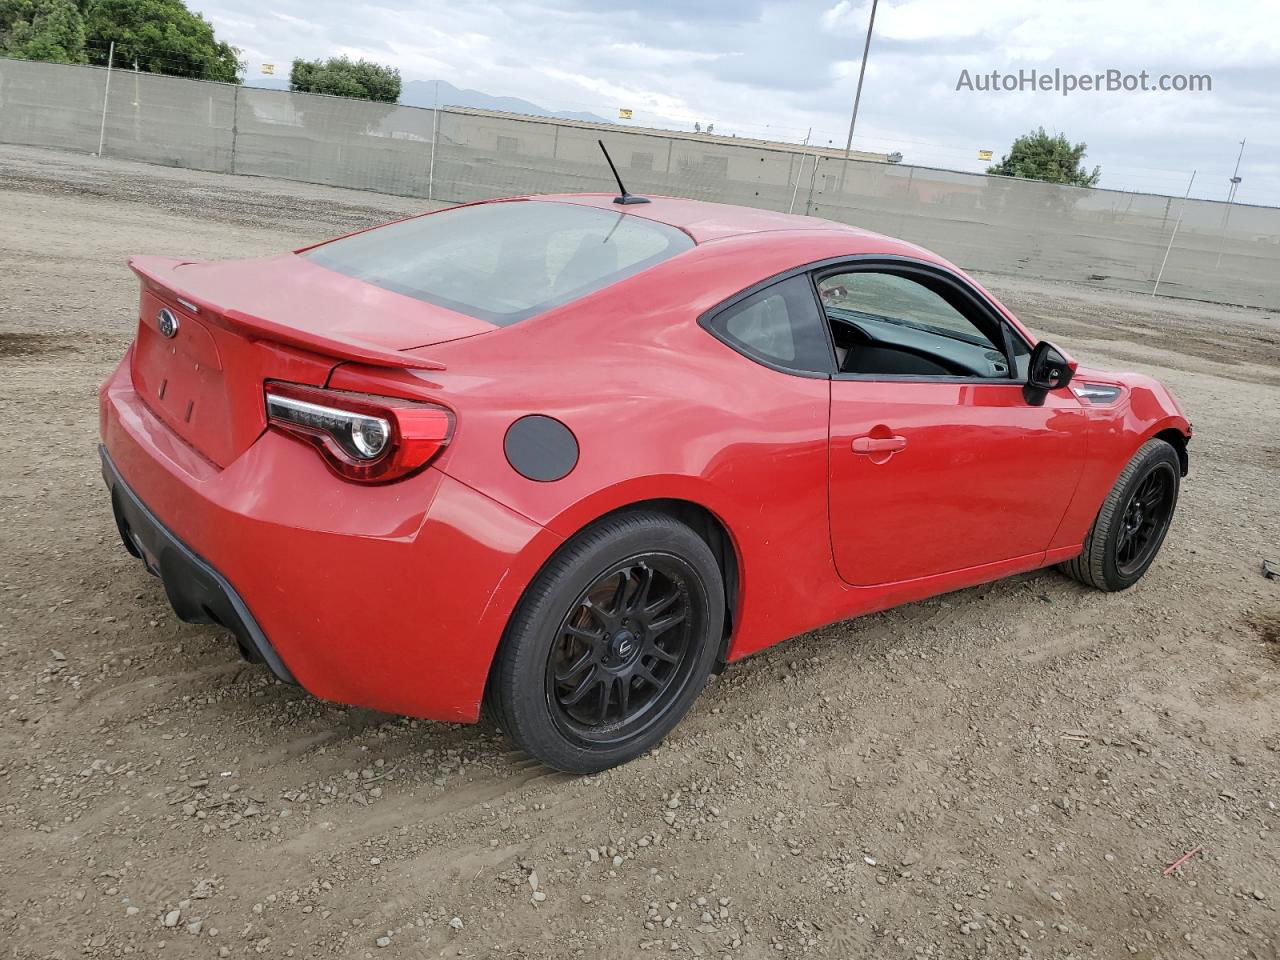 2013 Subaru Brz 2.0 Limited Red vin: JF1ZCAC14D2610816